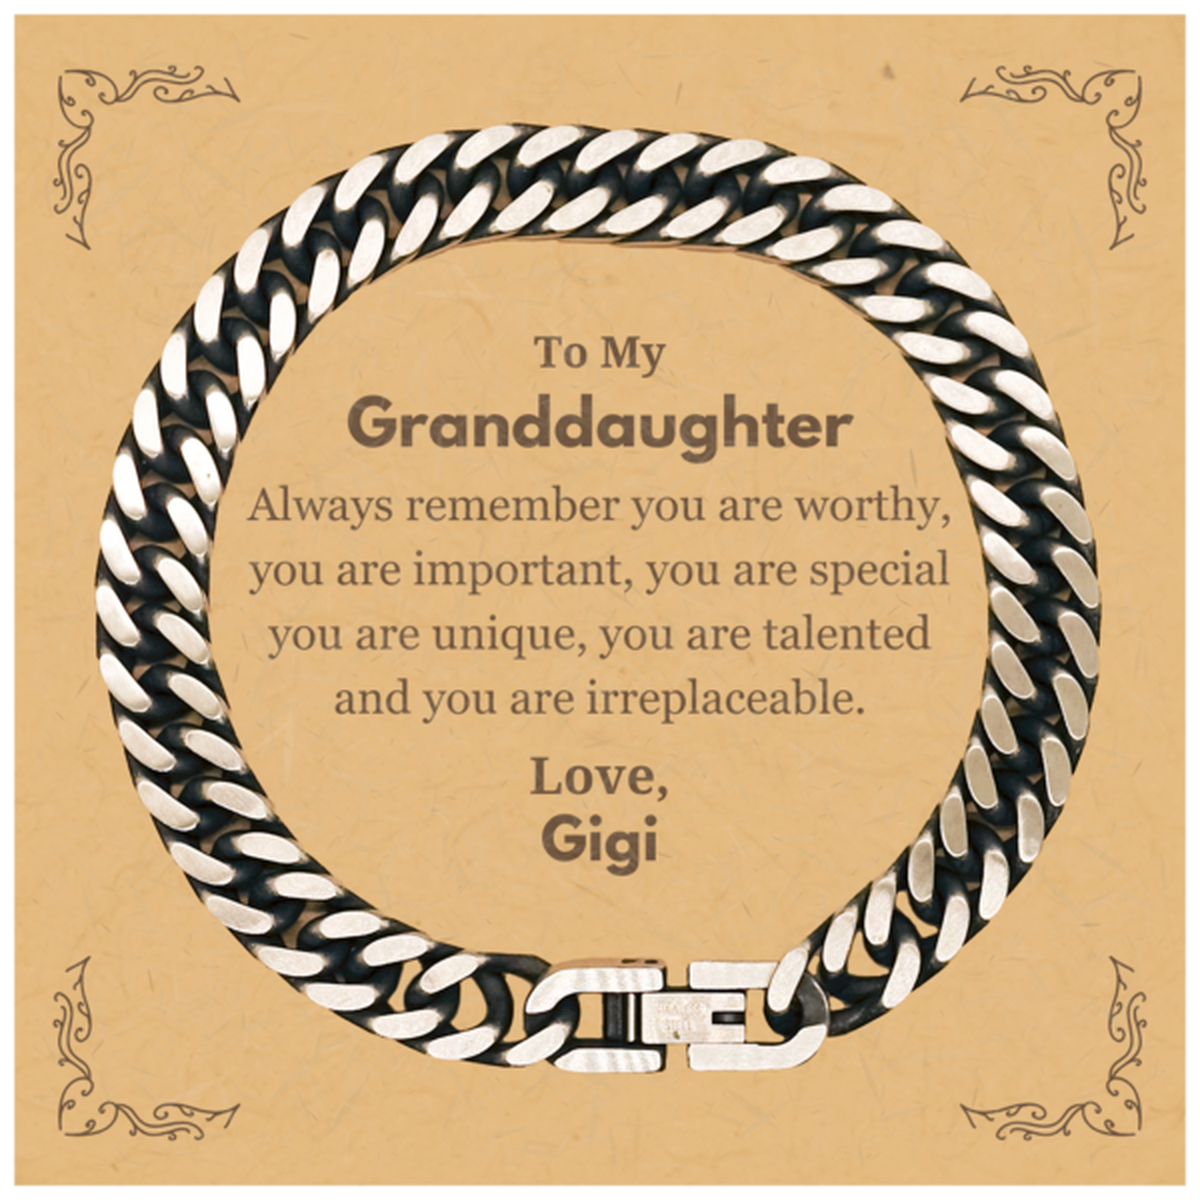 Granddaughter Birthday Gifts from Gigi, Inspirational Cuban Link Chain Bracelet for Granddaughter Christmas Graduation Gifts for Granddaughter Always remember you are worthy, you are important. Love, Gigi